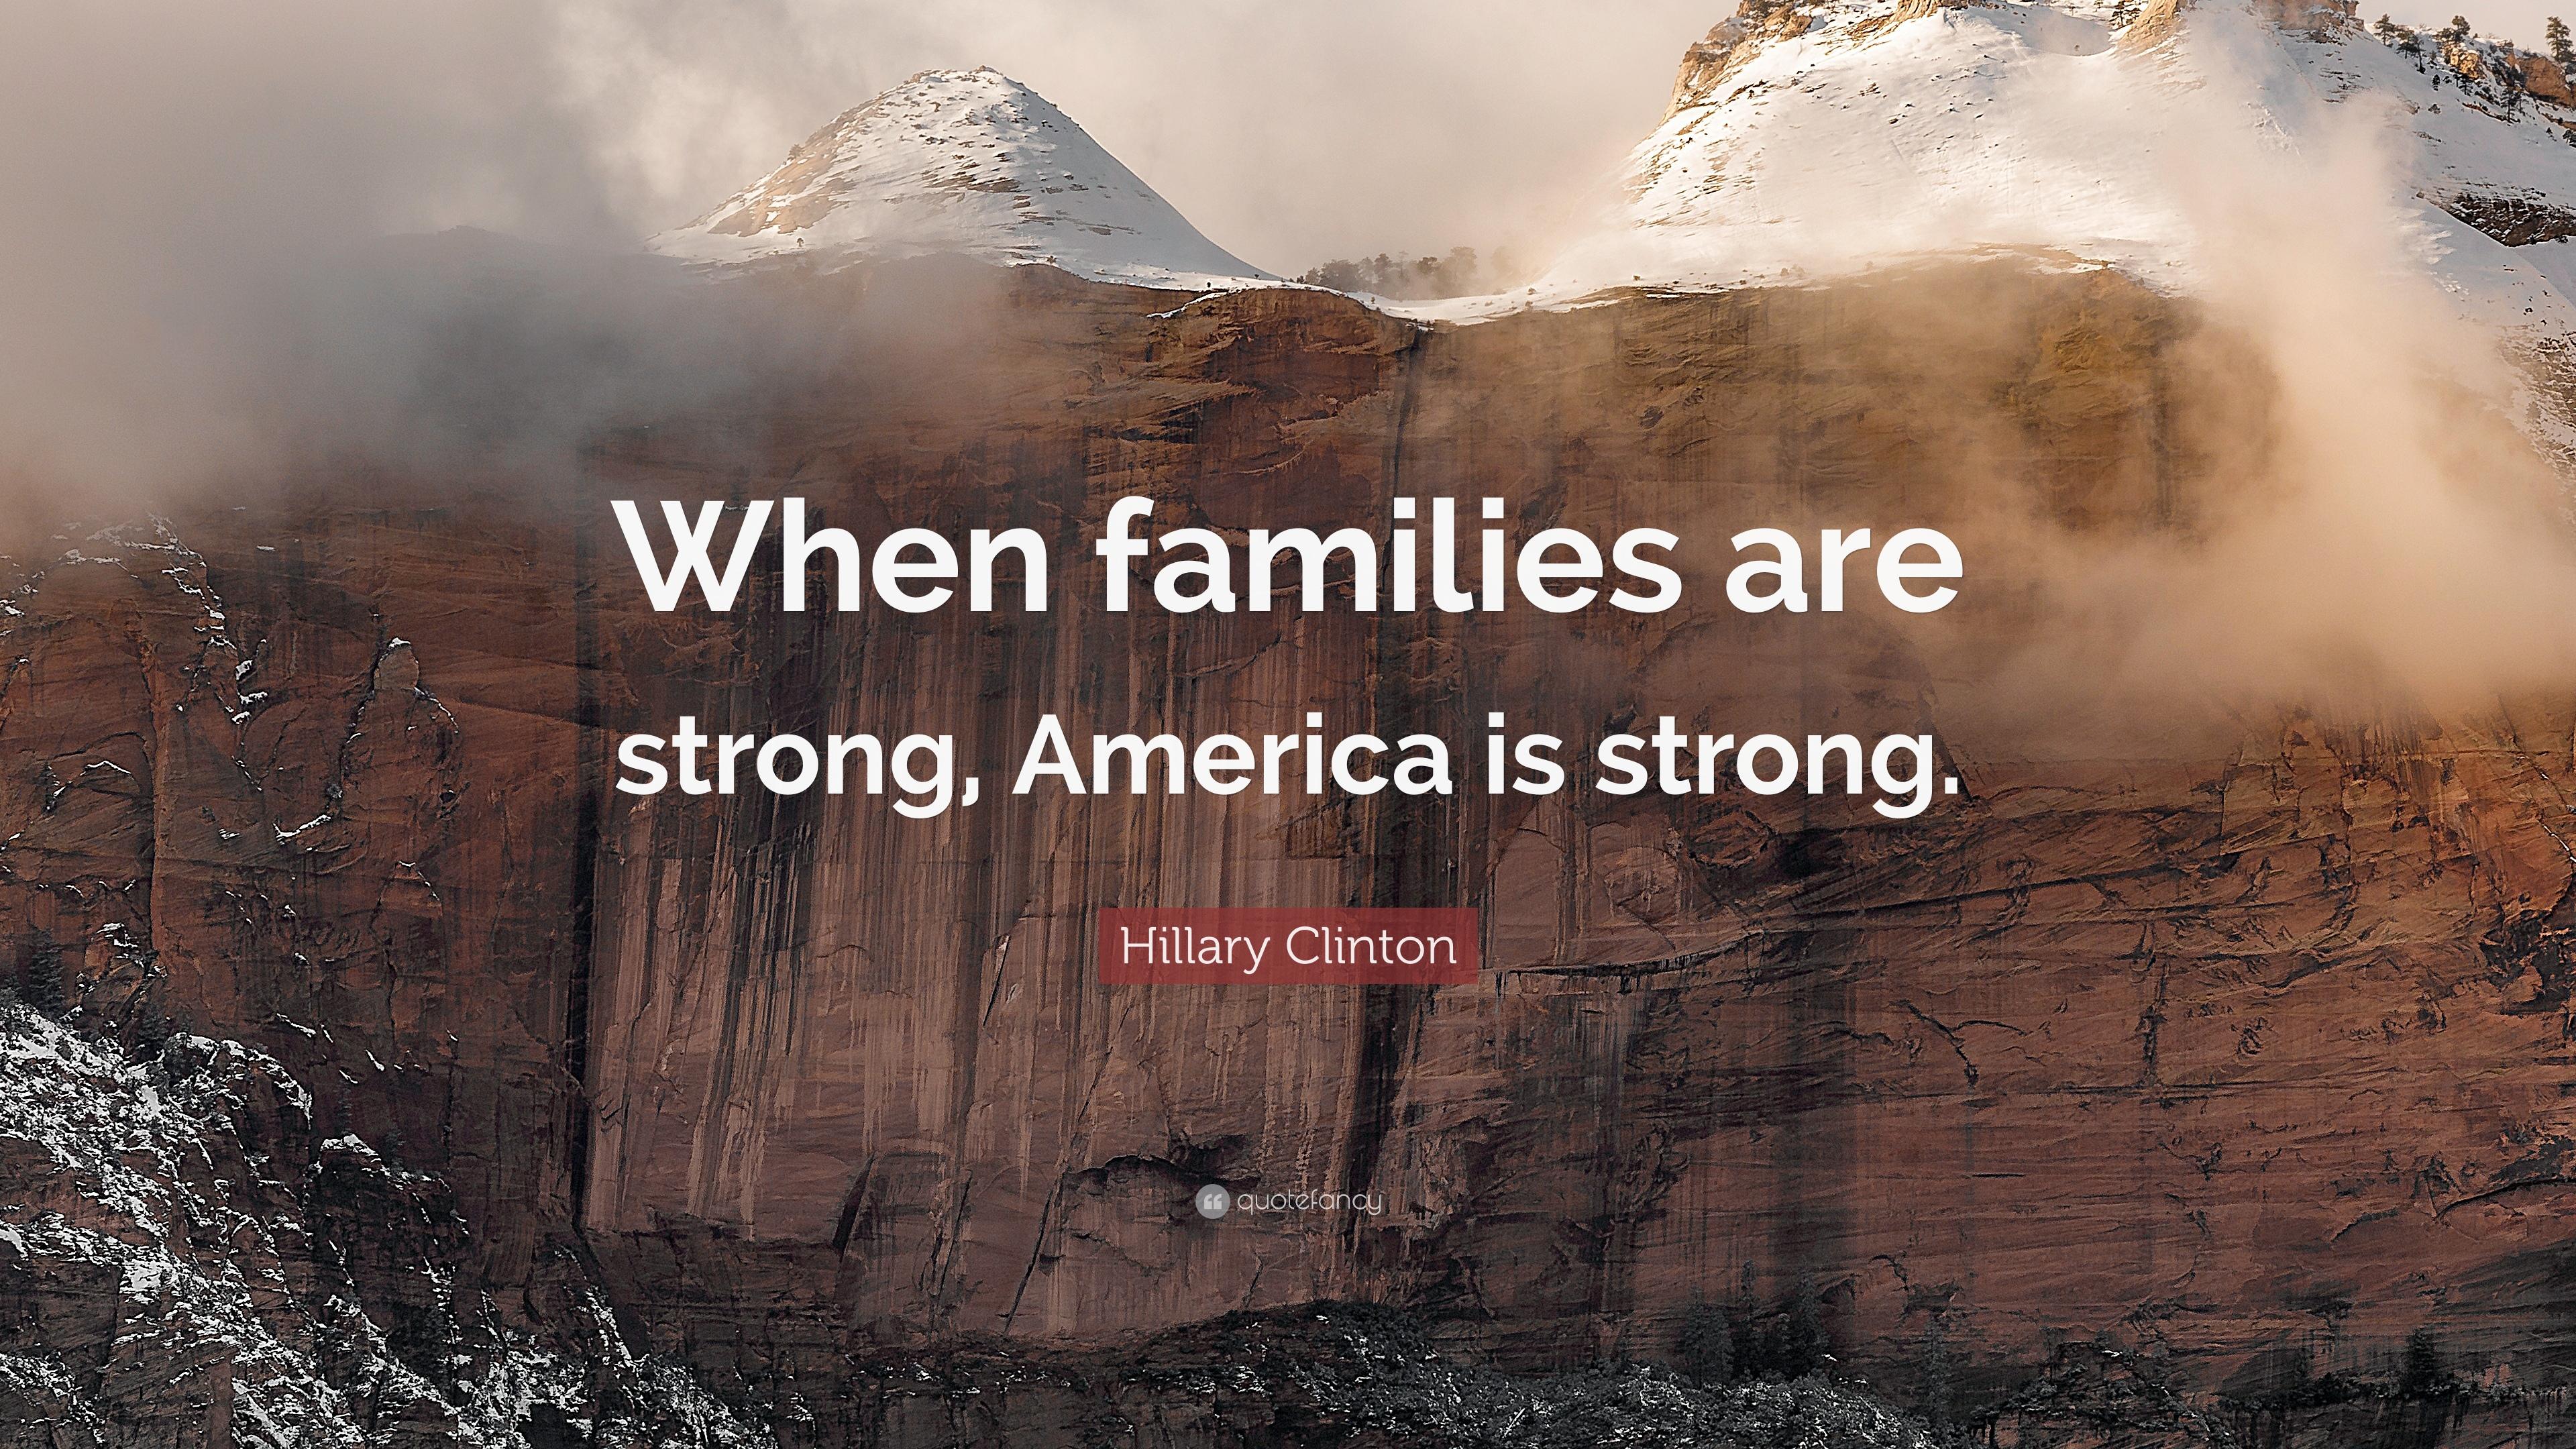 Hillary Clinton Quote: “When families are strong, America is strong